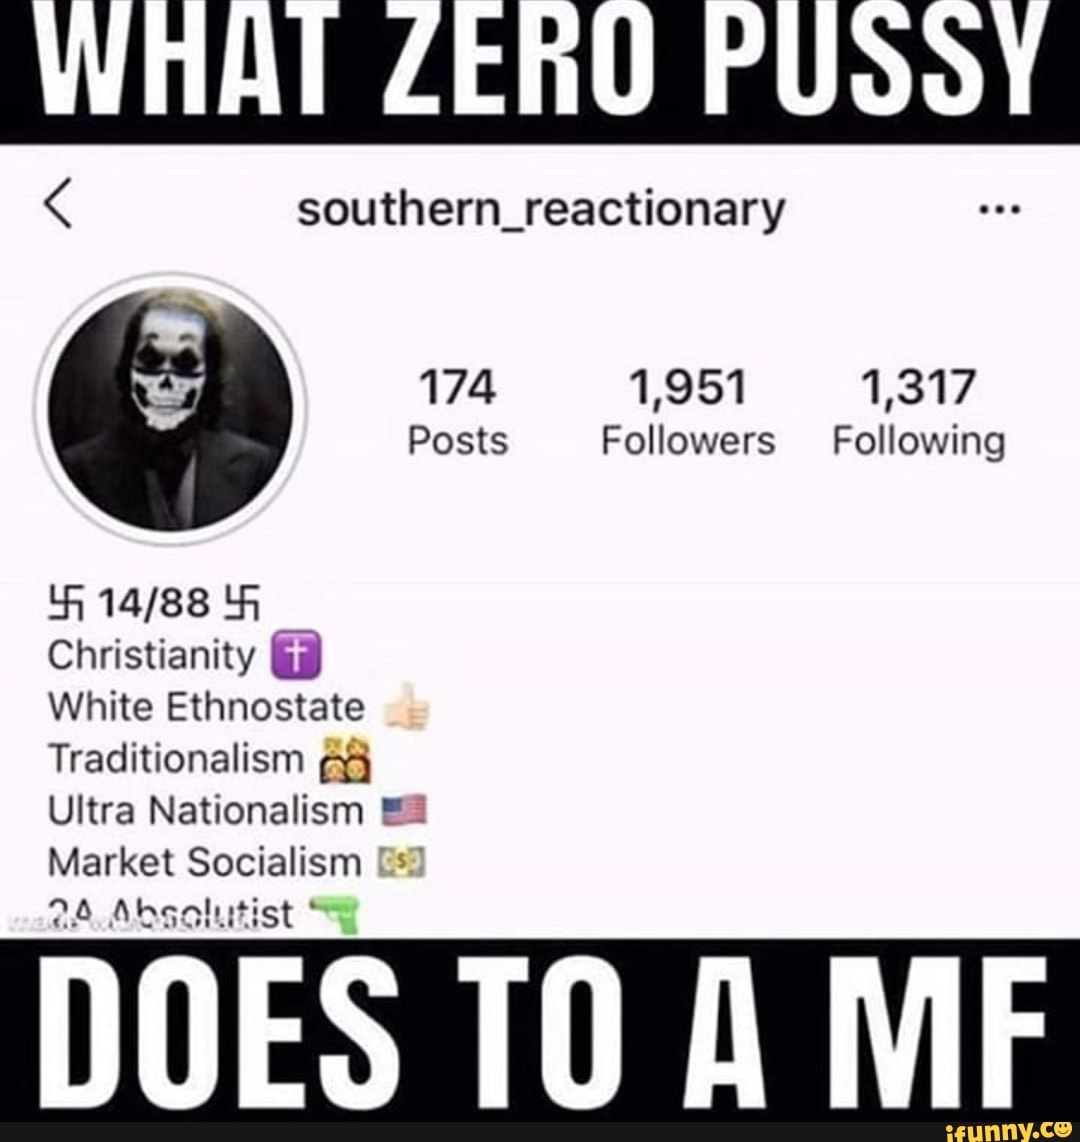 southern_reactionary 174 1,951 Posts Followers Christianity White Ethnostat...